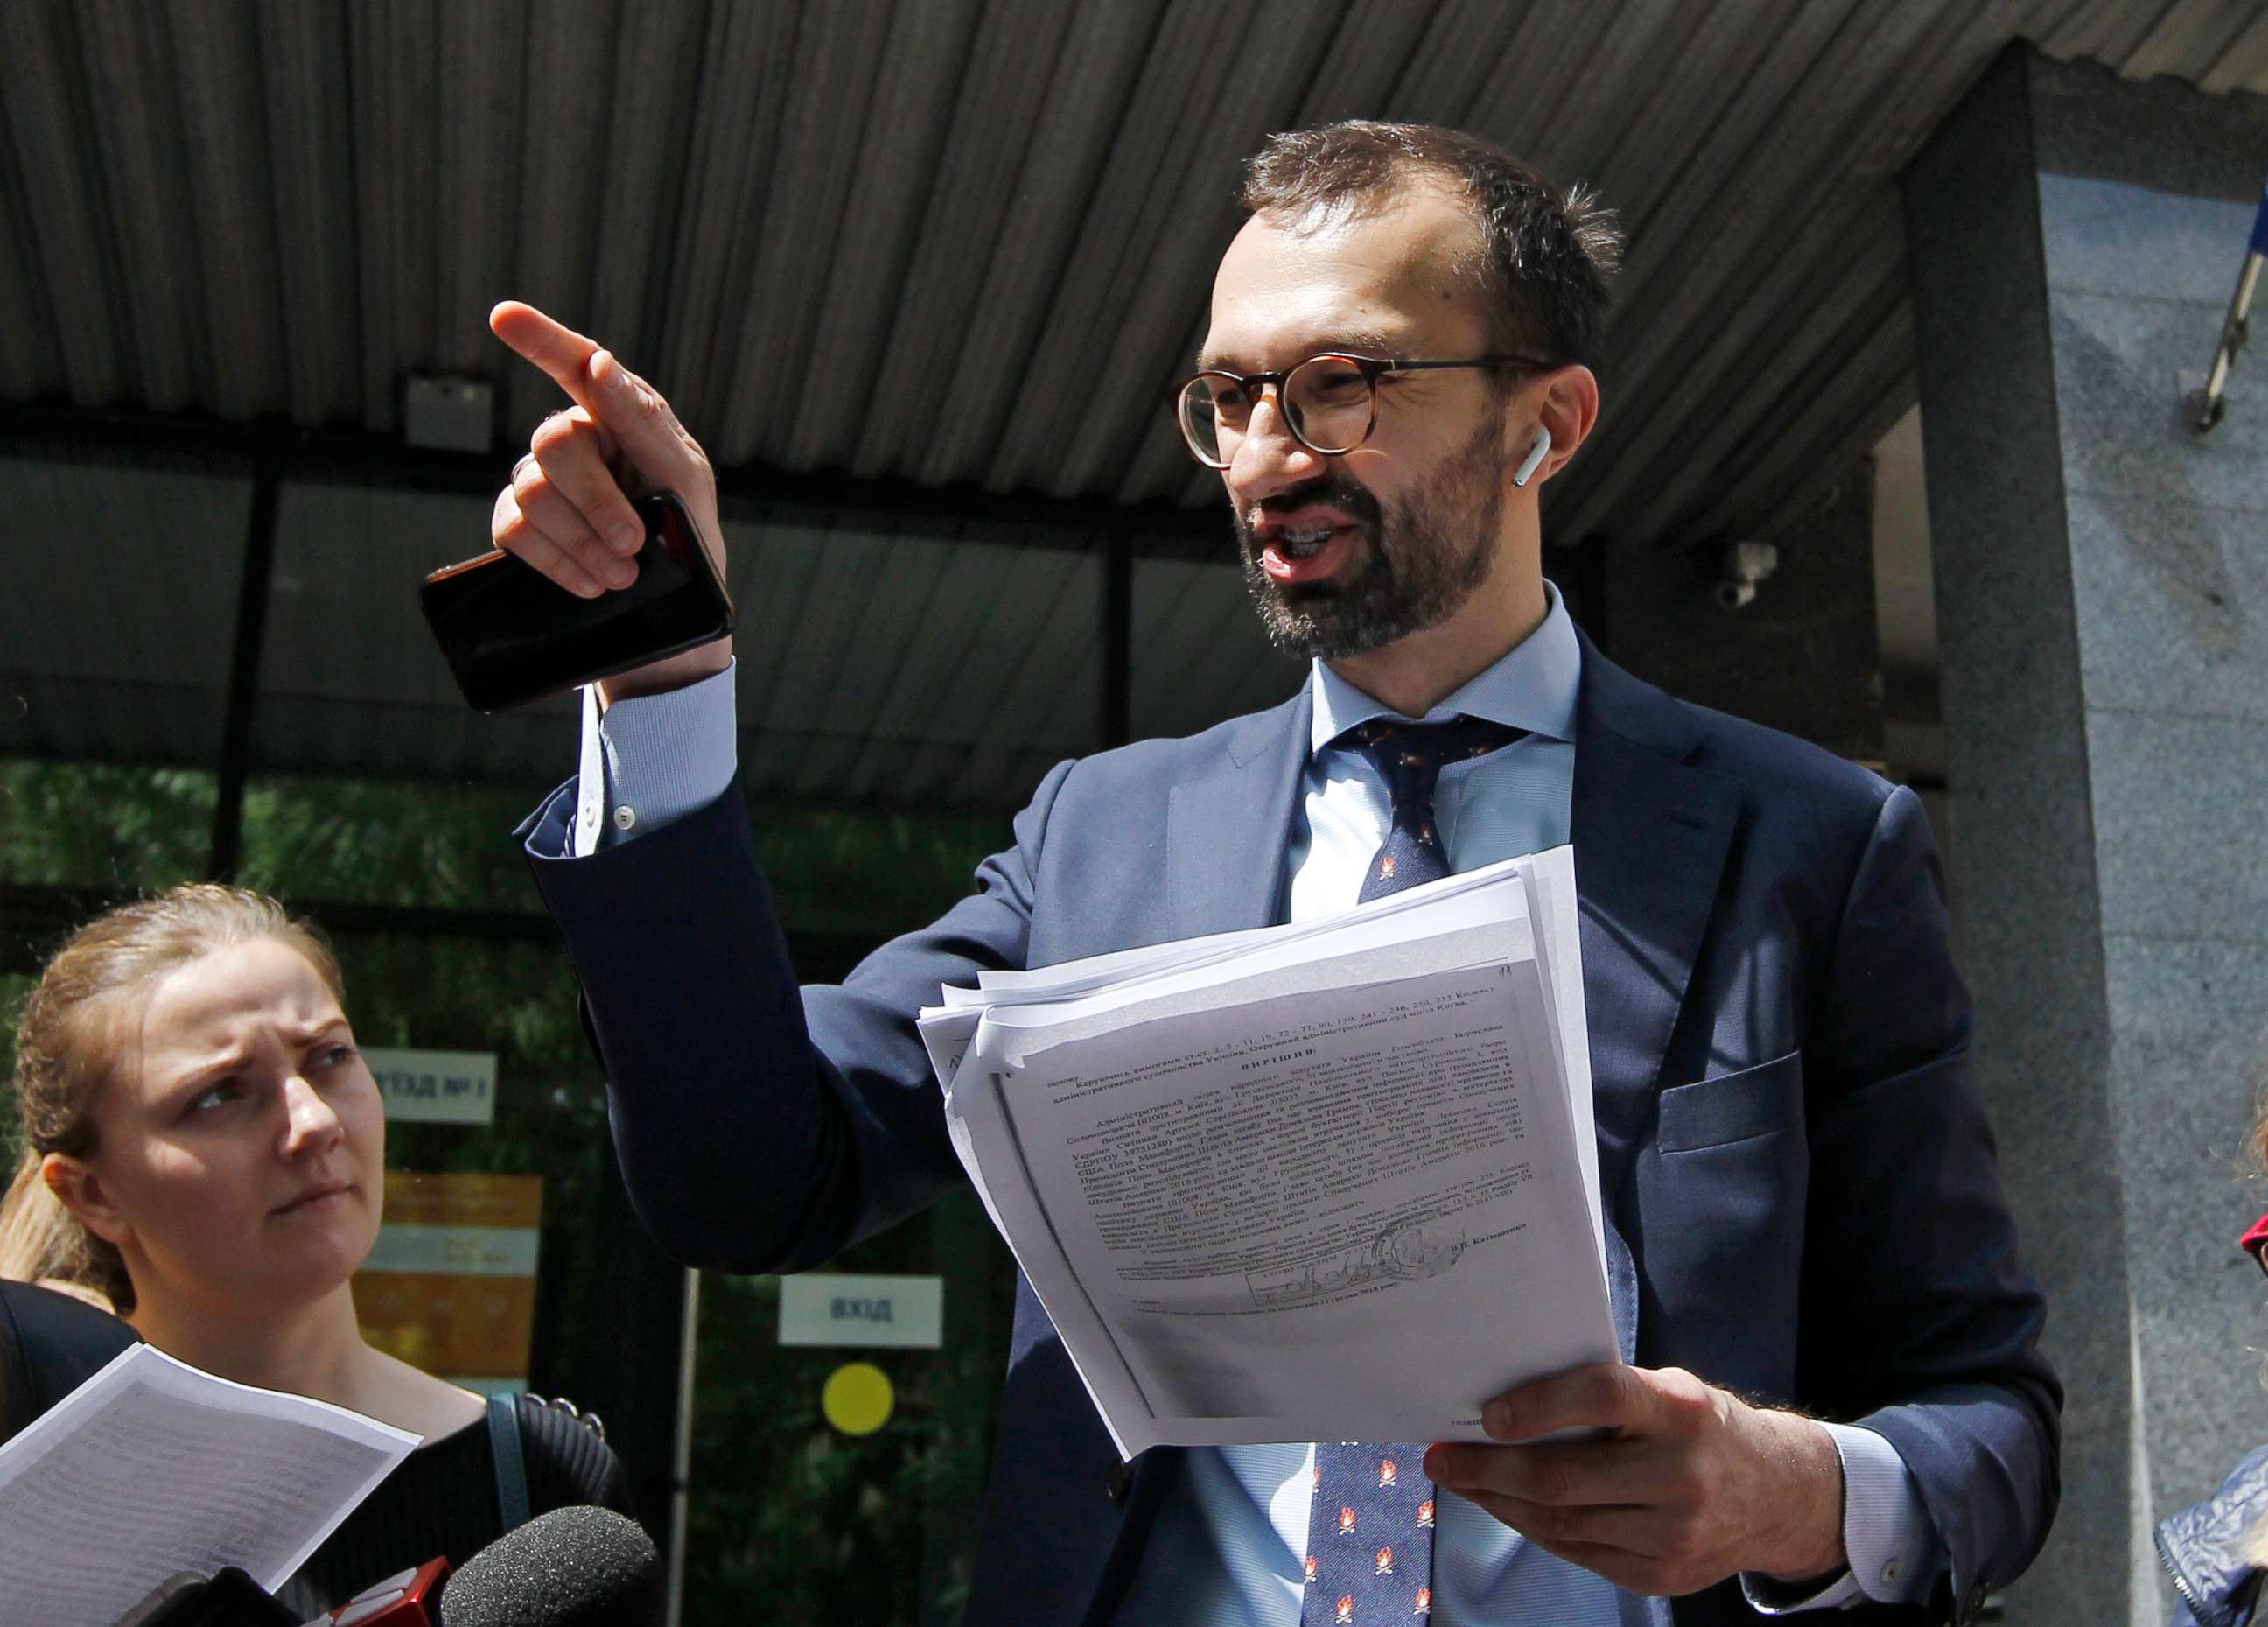 PHOTO: Ukrainian lawmaker Sergiy Leschenko speaks and shows documents to journalists in front of a courthouse in Kyiv, Ukraine, on May 13, 2019.